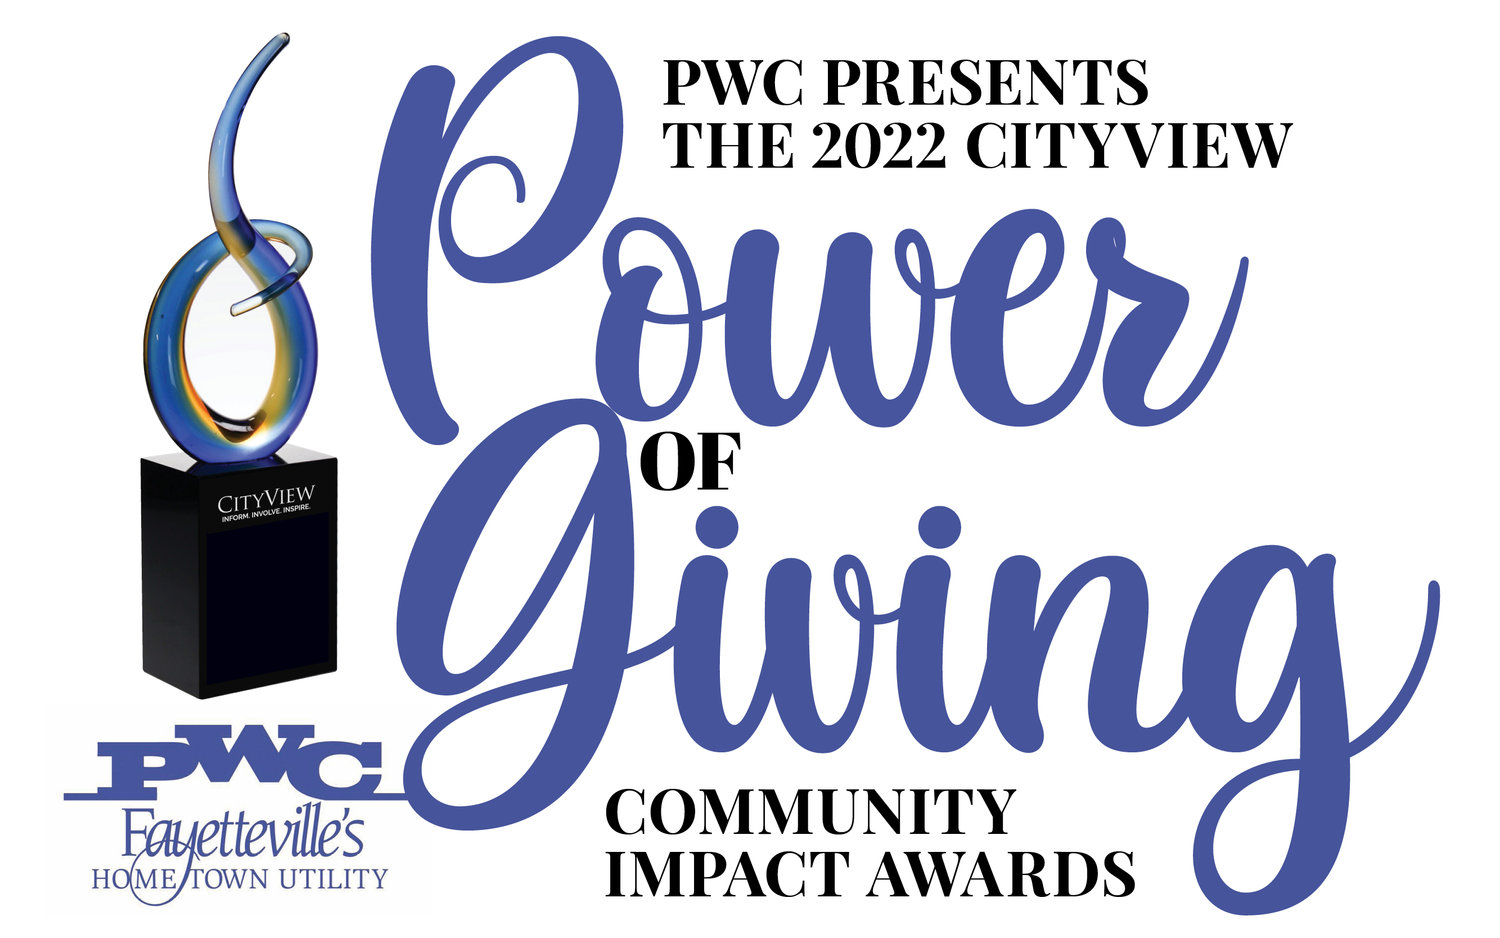 CityView Magazine is accepting nominations for its 2022 Community Impact Awards. The deadline to submit a nomination is Sept. 16.